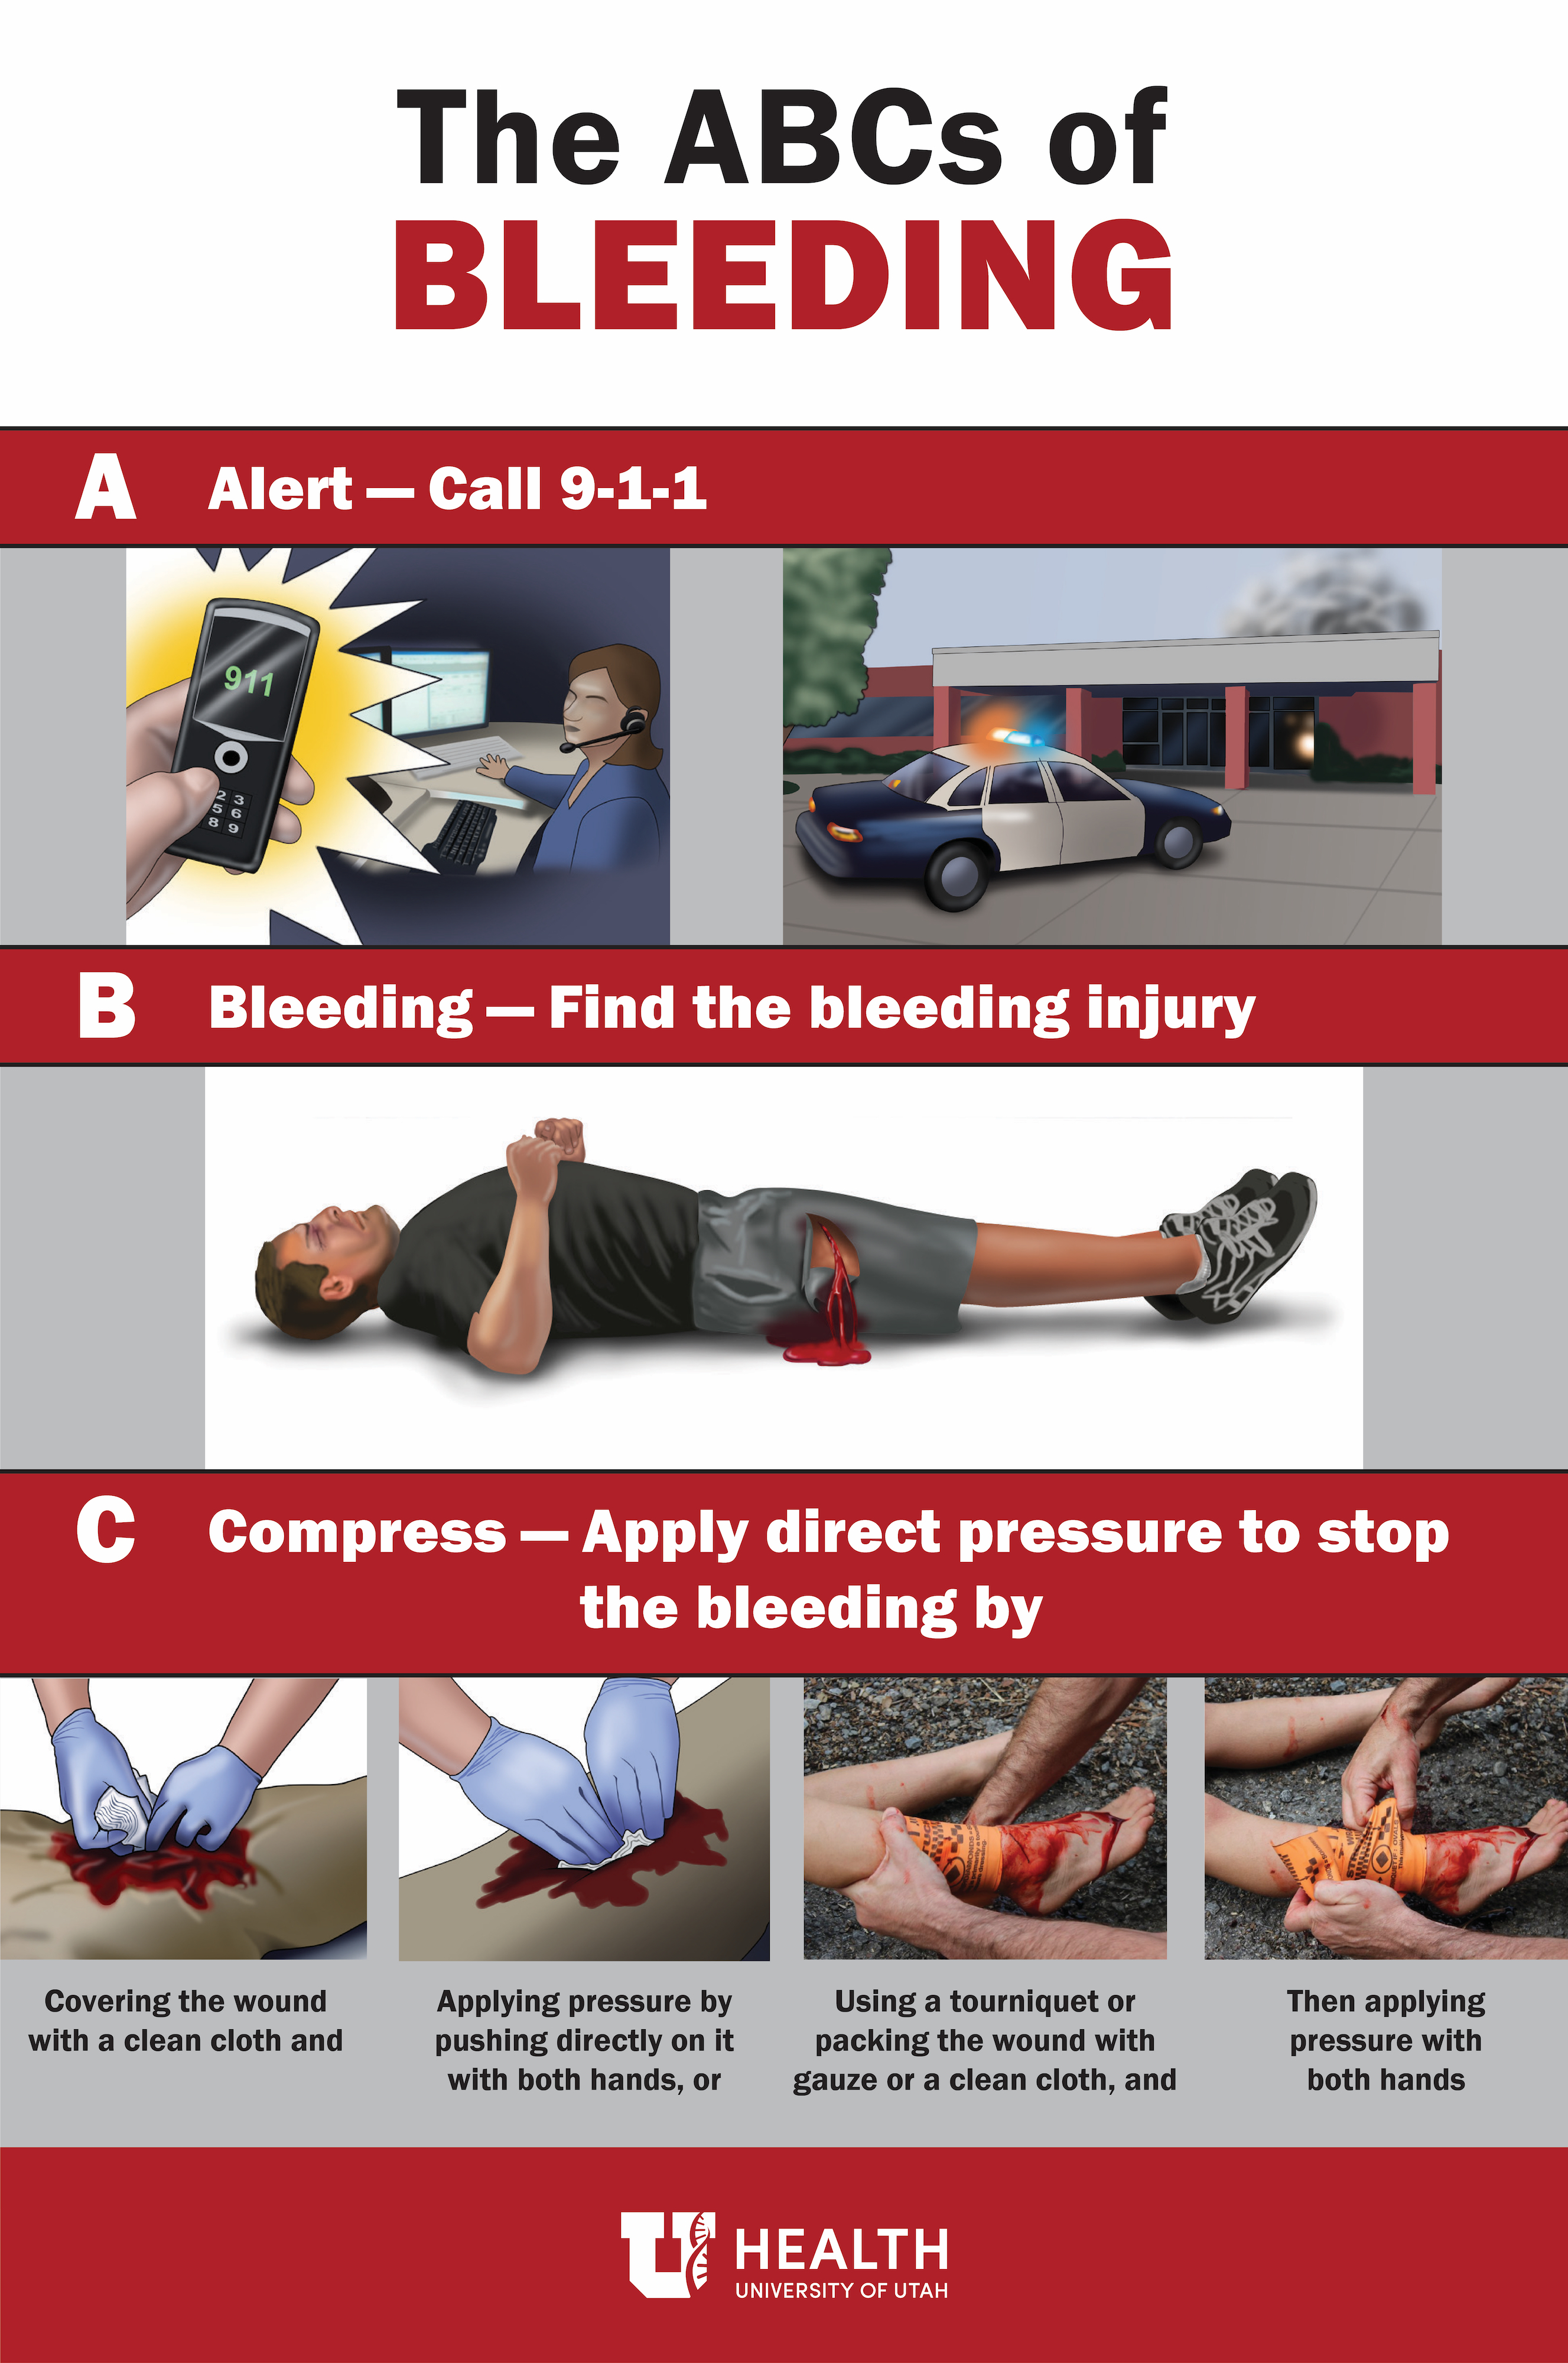 Stop the Bleed ABCs